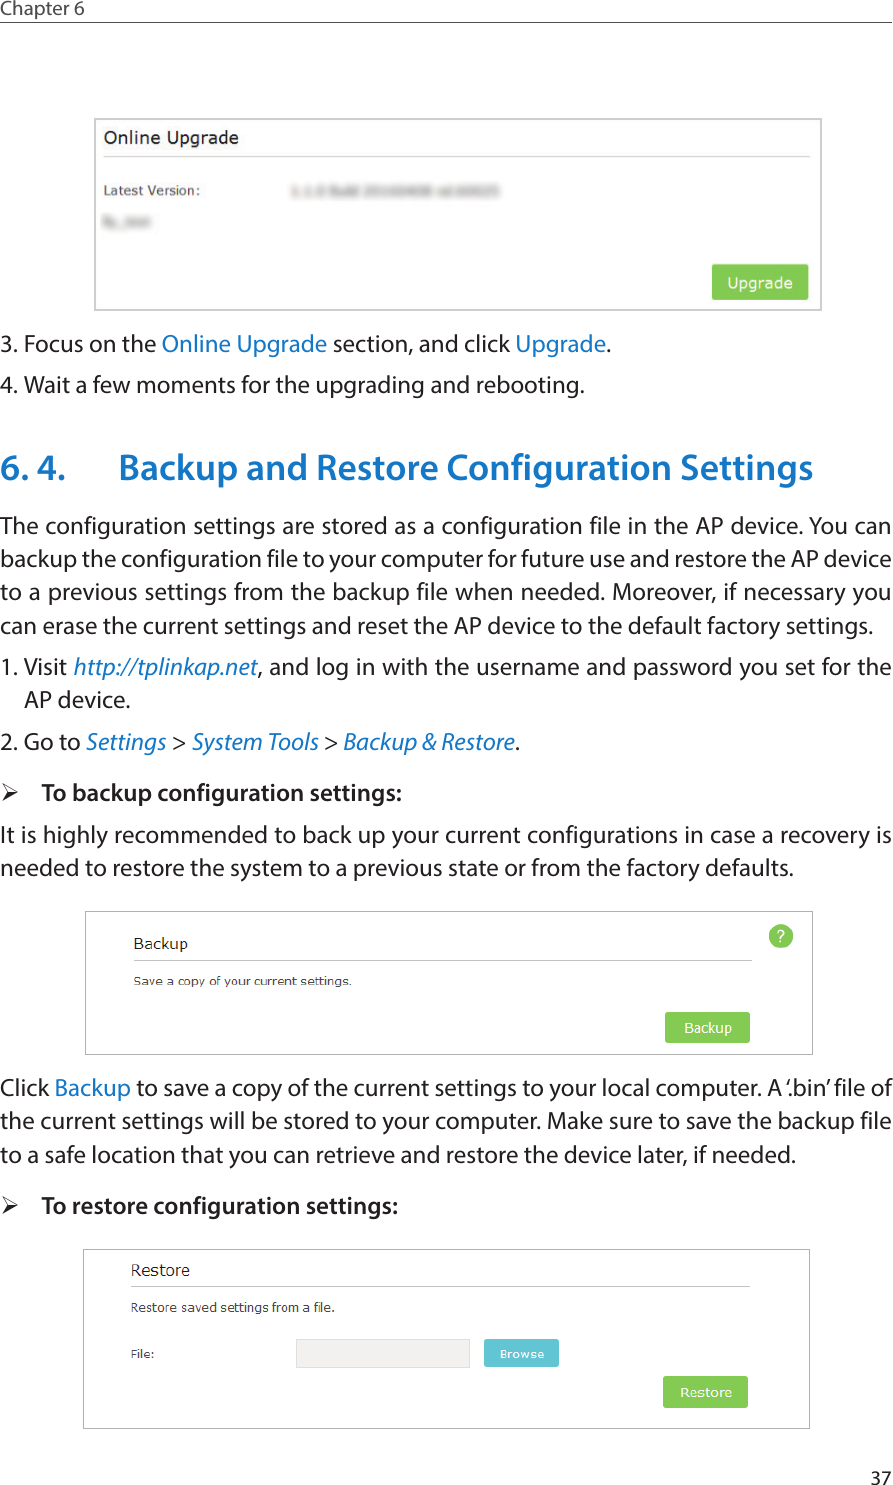 37Chapter 6  3. Focus on the Online Upgrade section, and click Upgrade.4. Wait a few moments for the upgrading and rebooting. 6. 4.  Backup and Restore Configuration SettingsThe configuration settings are stored as a configuration file in the AP device. You can backup the configuration file to your computer for future use and restore the AP device to a previous settings from the backup file when needed. Moreover, if necessary you can erase the current settings and reset the AP device to the default factory settings. 1. Visit http://tplinkap.net, and log in with the username and password you set for the AP device.2. Go to Settings &gt; System Tools &gt; Backup &amp; Restore. ¾To backup configuration settings: It is highly recommended to back up your current configurations in case a recovery is needed to restore the system to a previous state or from the factory defaults. Click Backup to save a copy of the current settings to your local computer. A ‘.bin’ file of the current settings will be stored to your computer. Make sure to save the backup file to a safe location that you can retrieve and restore the device later, if needed. ¾To restore configuration settings:  